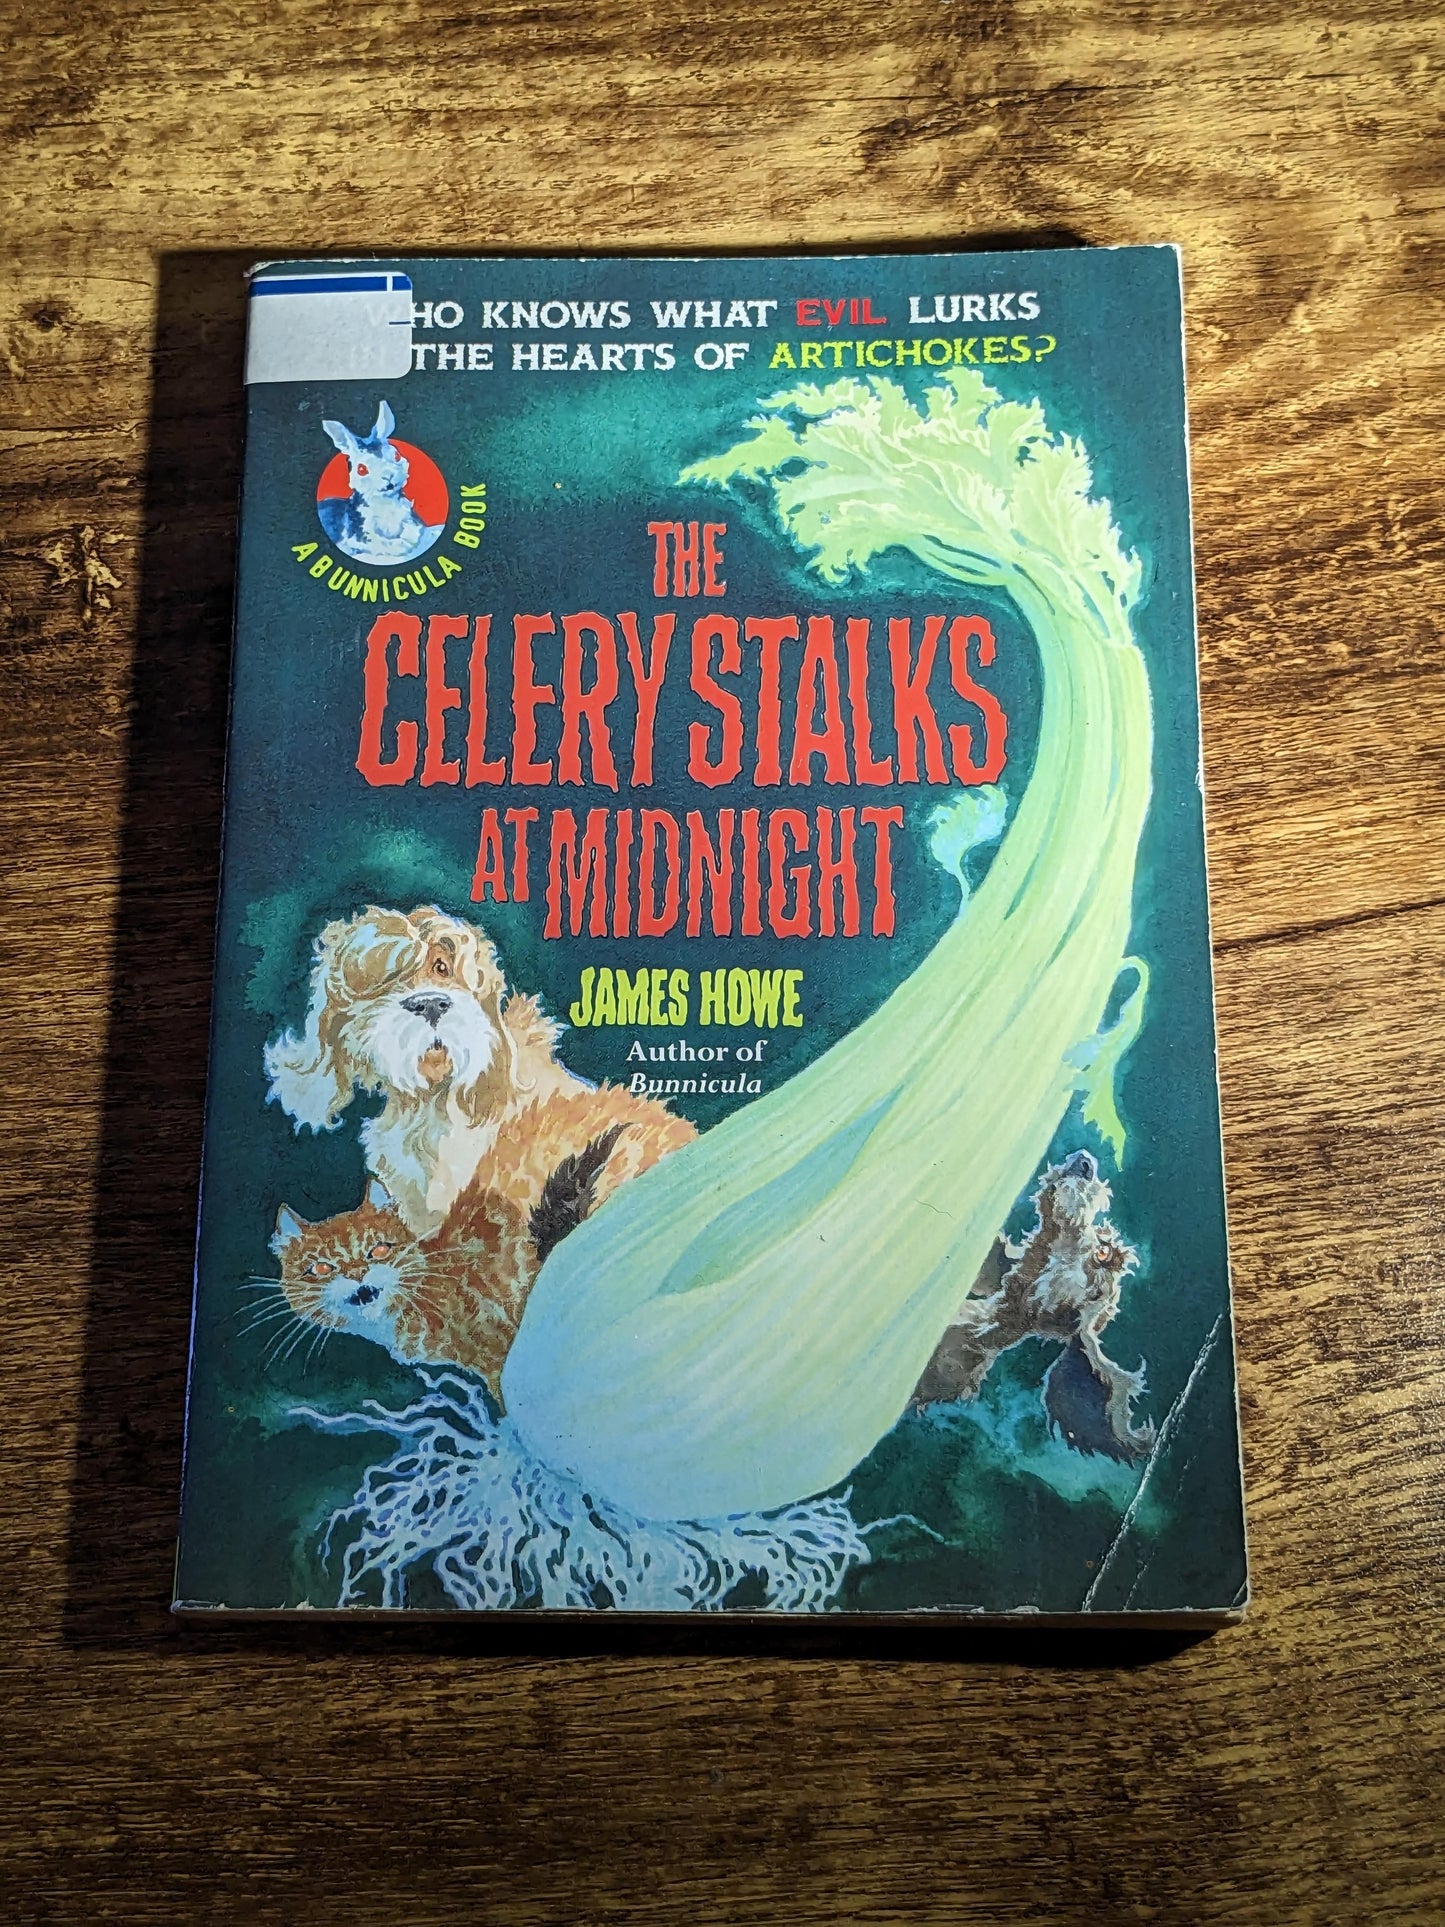 CELERY STALKS at MIDNIGHT - Vintage Kids Horror Paperback by James Howe - Bestselling Comedy Thriller Chapter Book for Younger Readers - Asylum Books